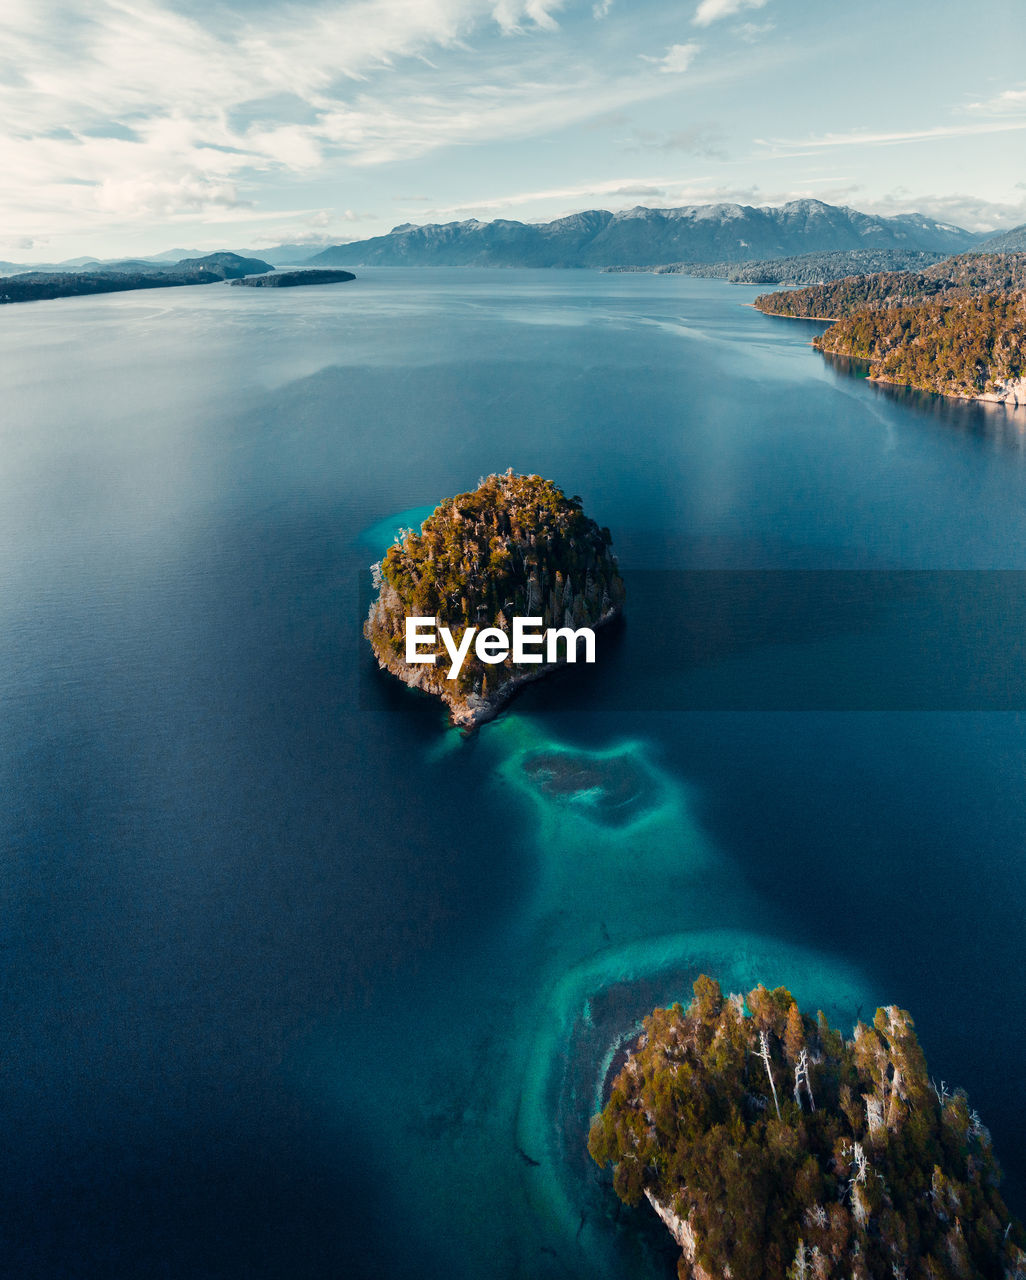 From above breathtaking aerial view of island in calm lake with turquoise water located in highlands